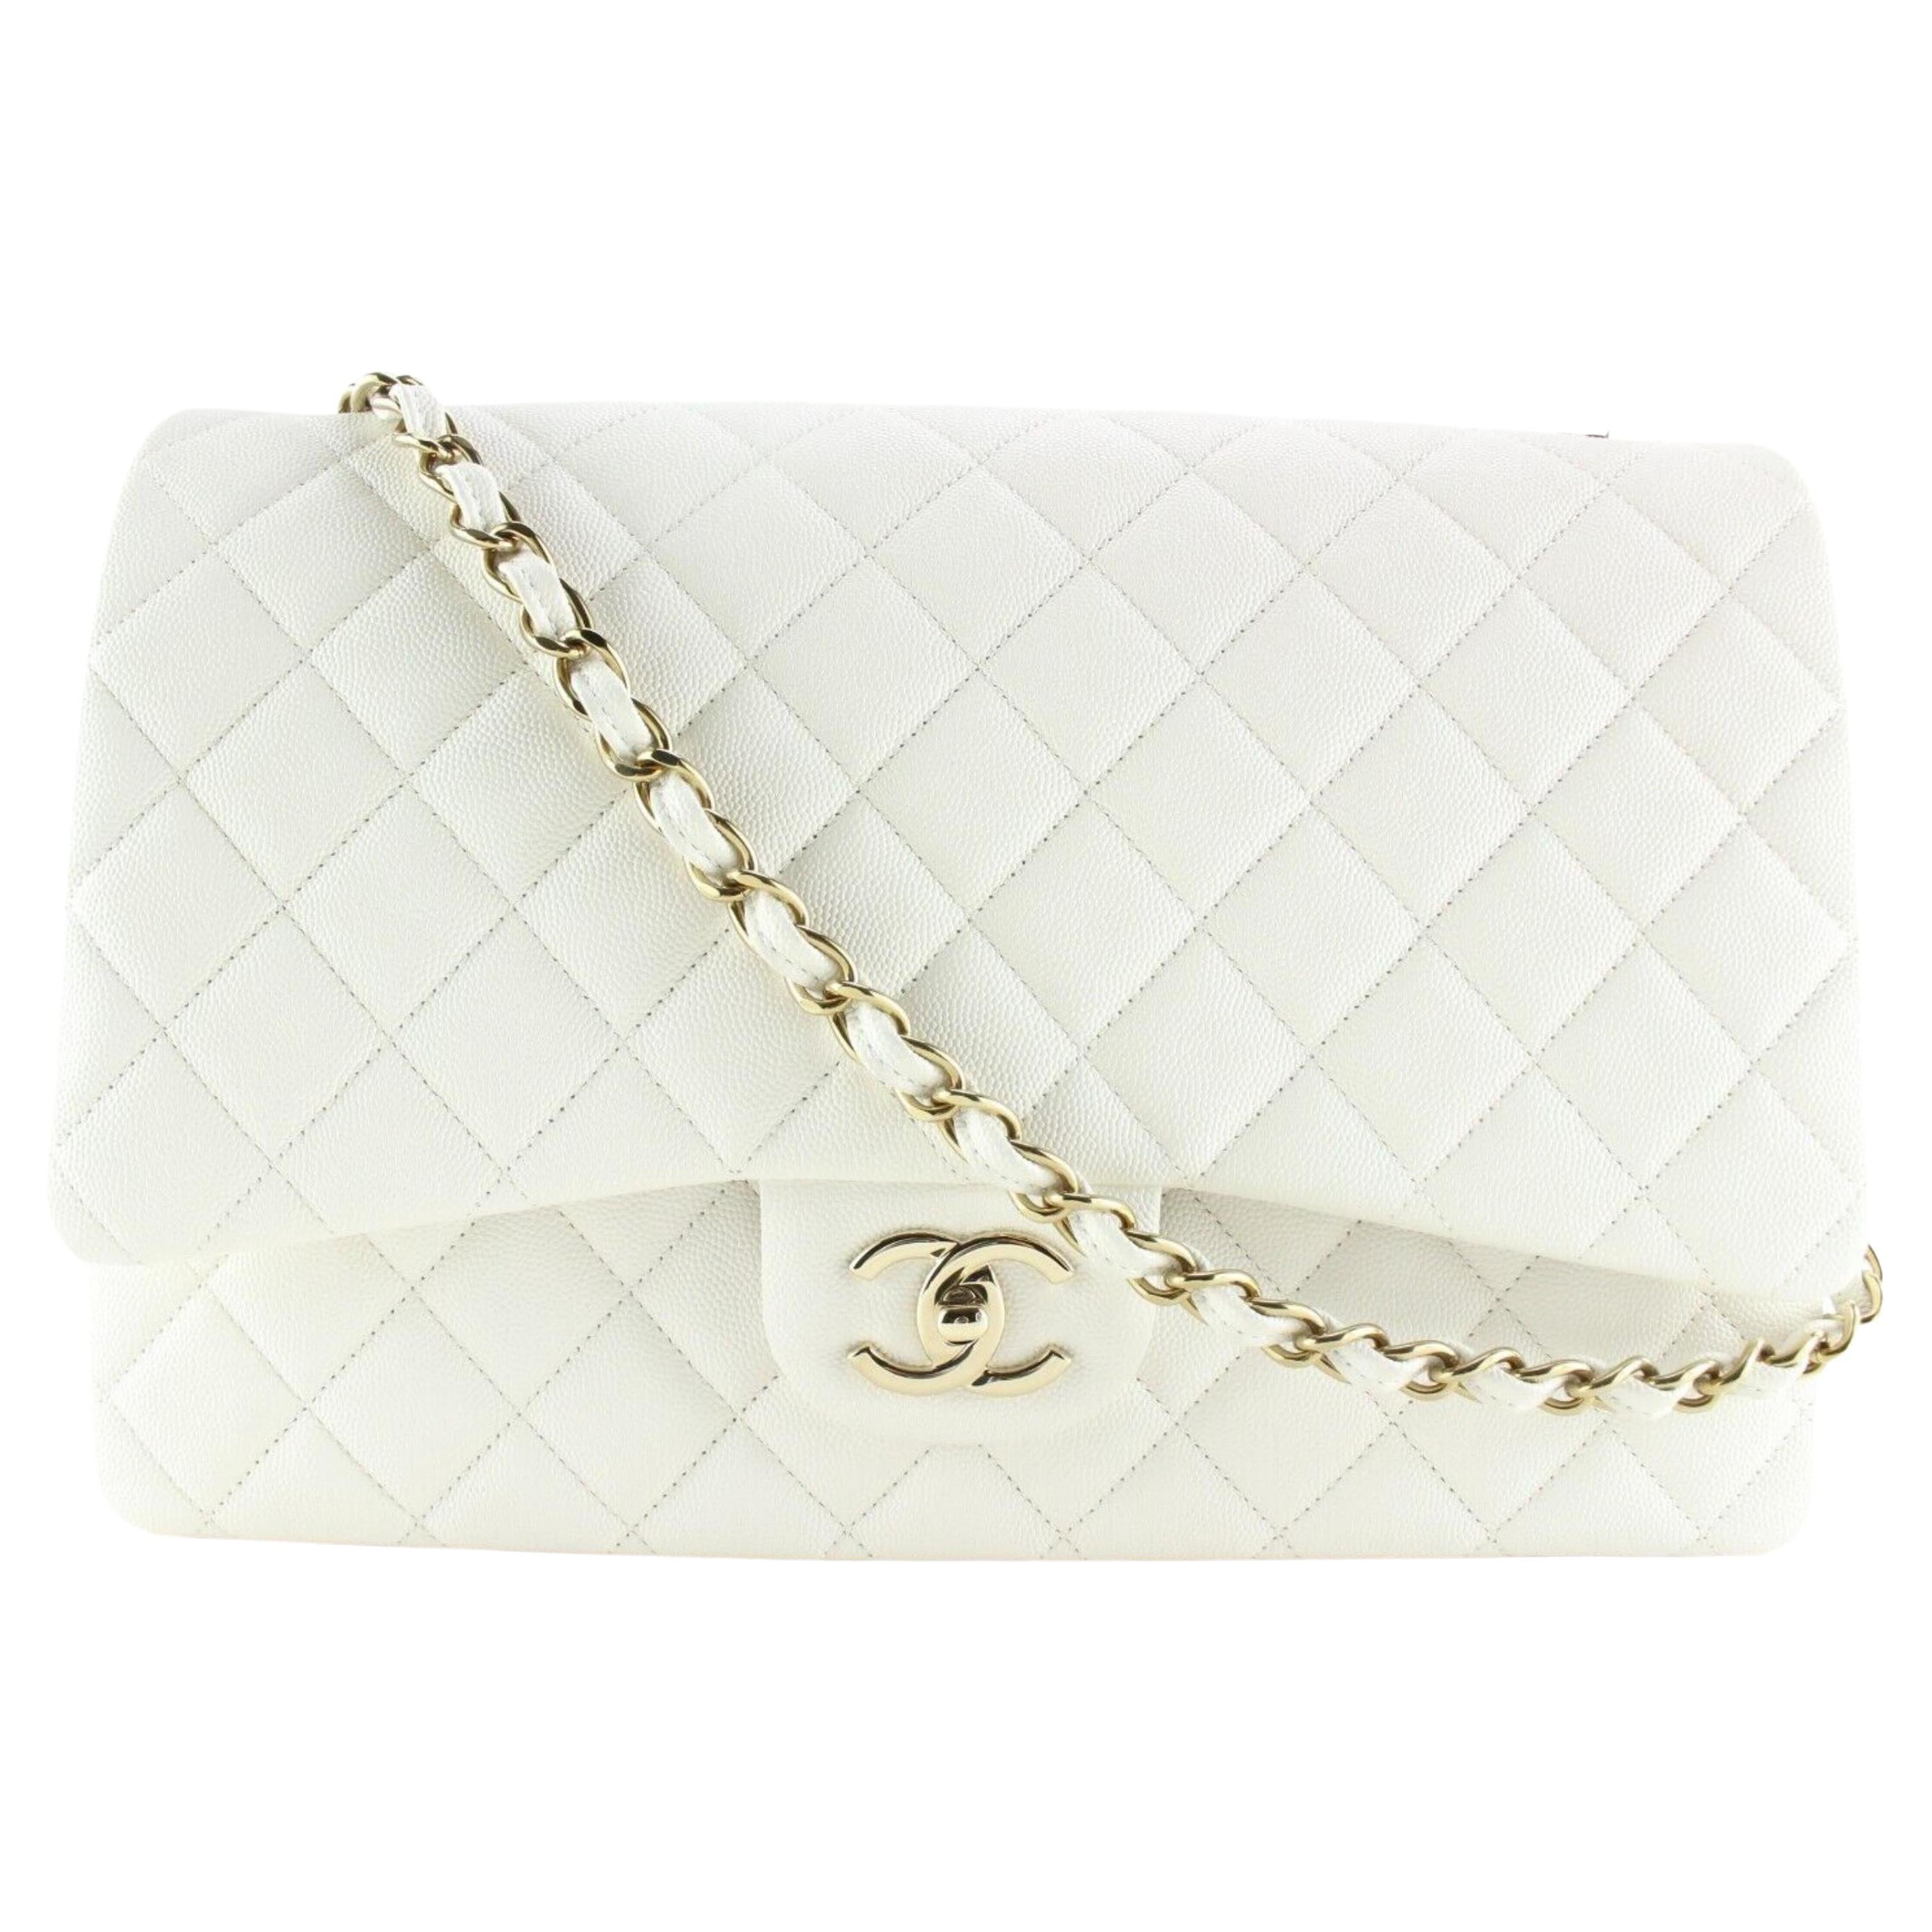 Does Chanel have white dust bags?